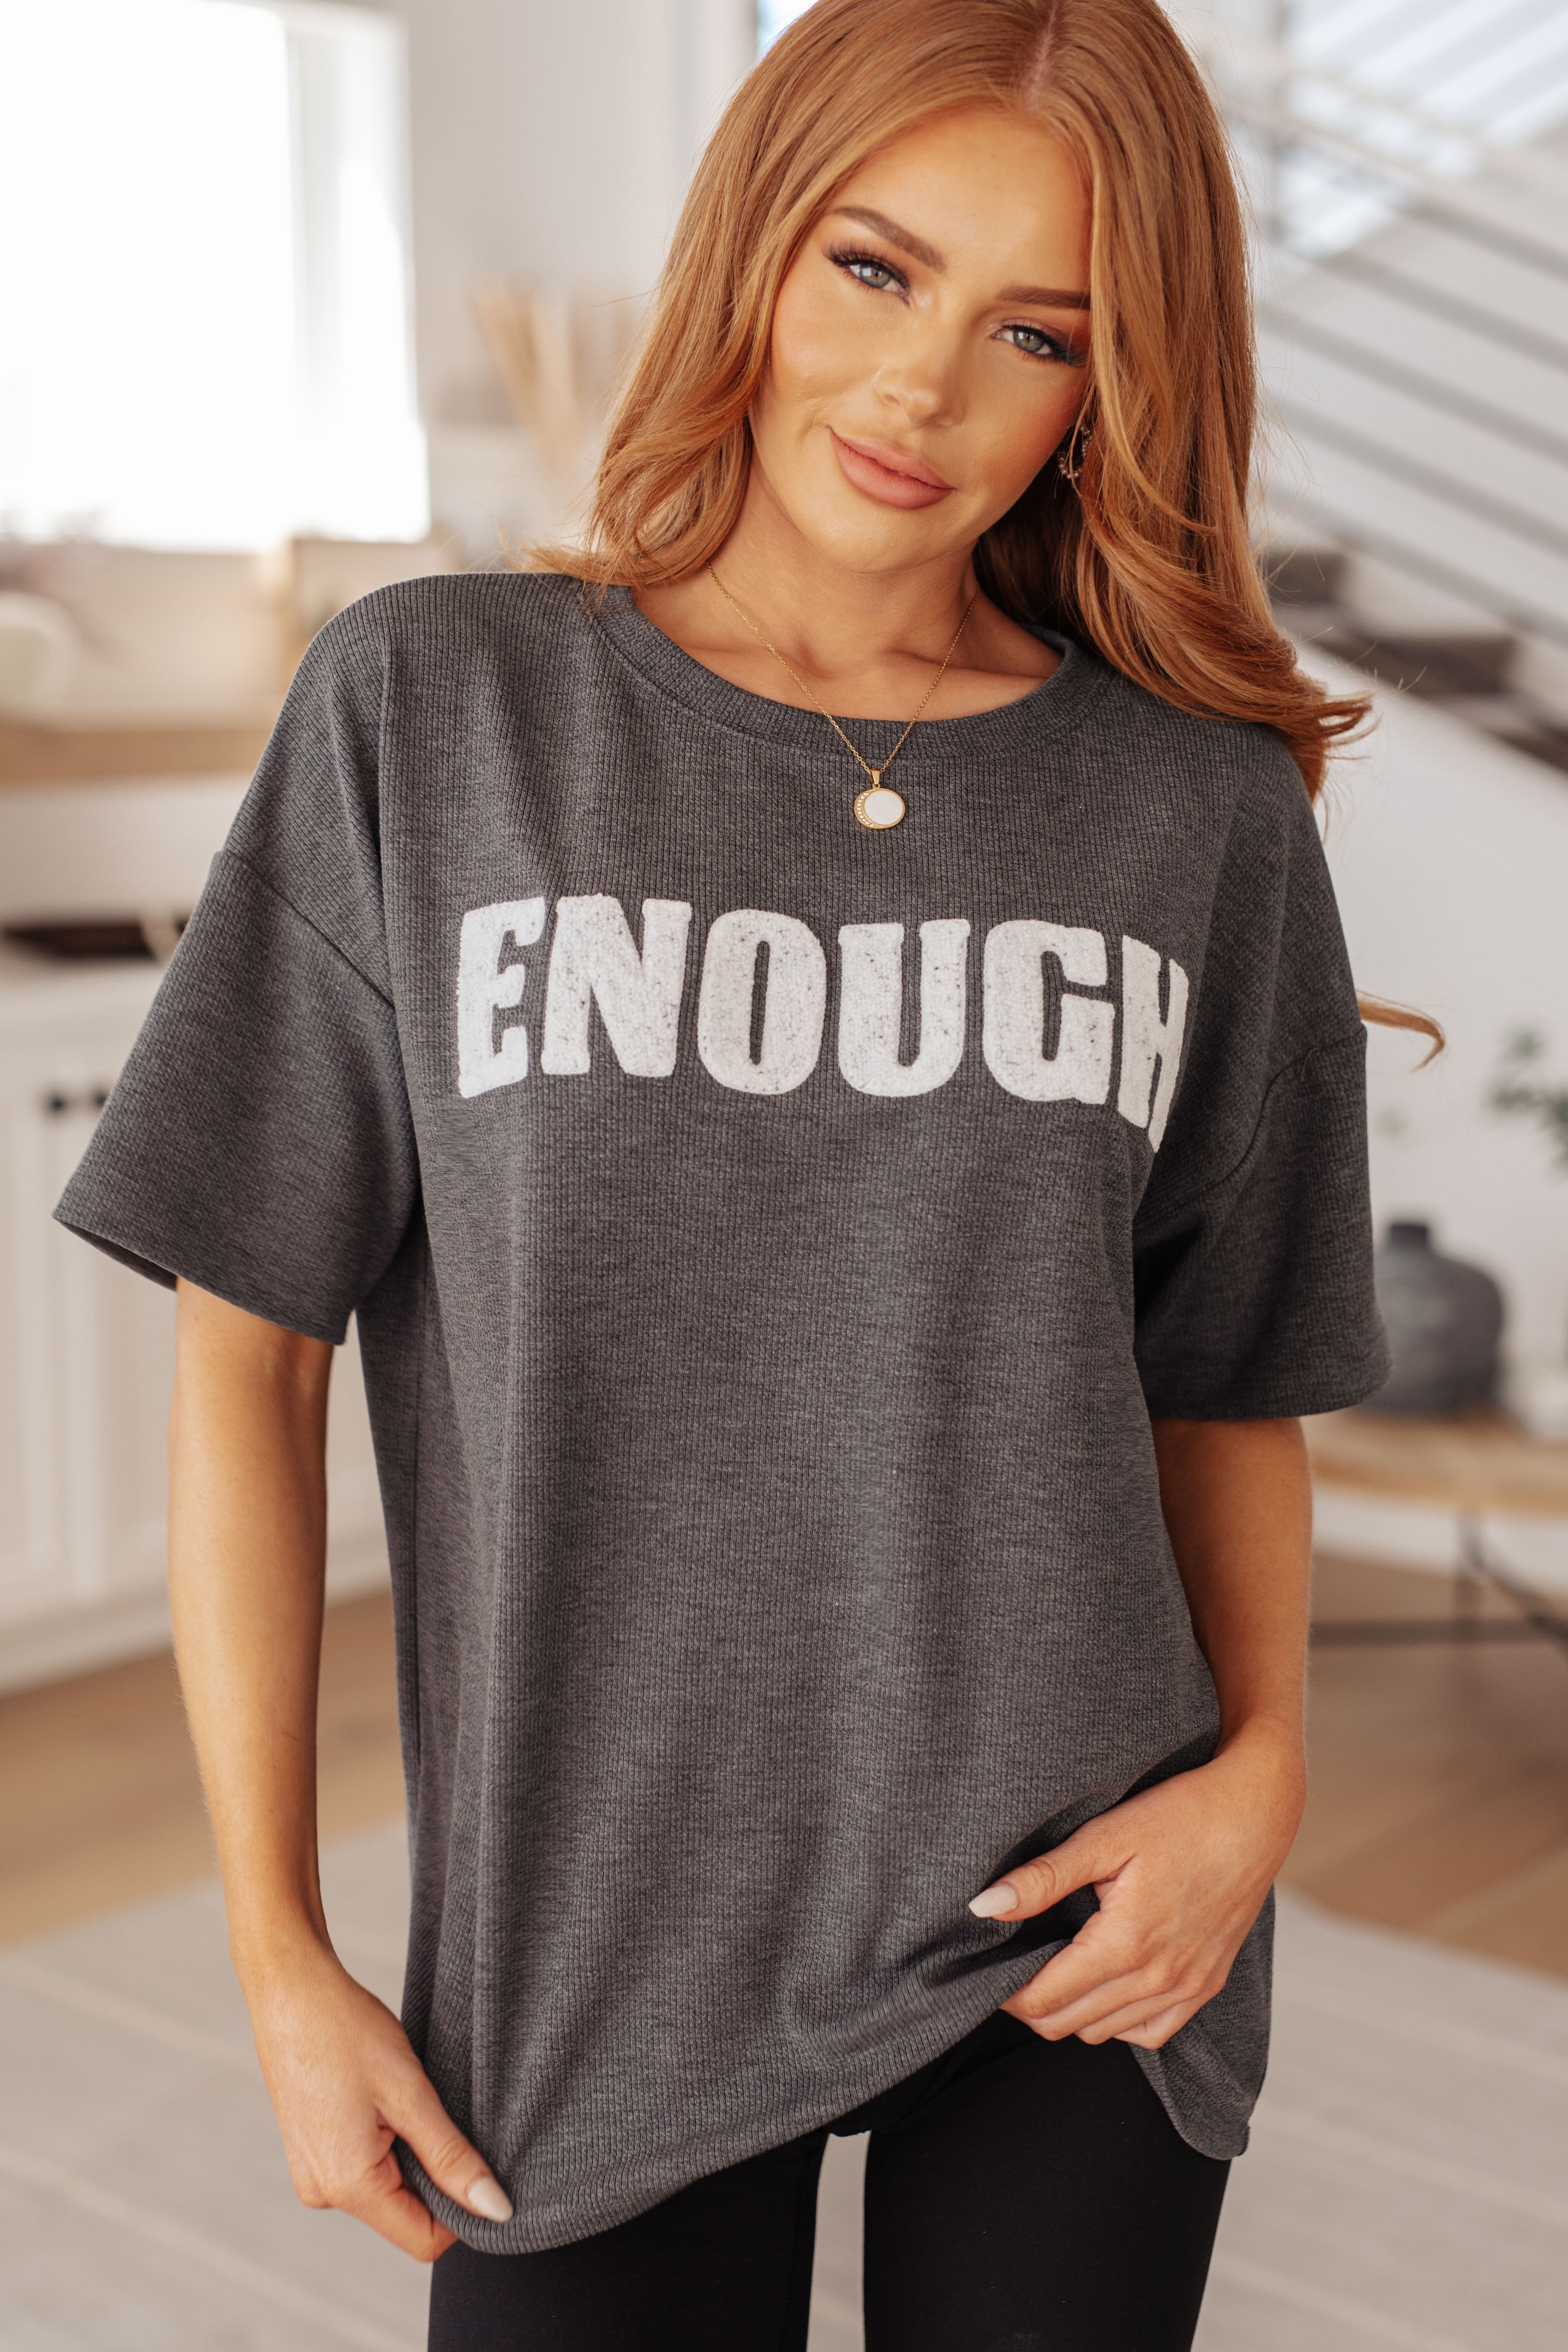 Always Enough Graphic Tee in Charcoal Tops Ave Shops   